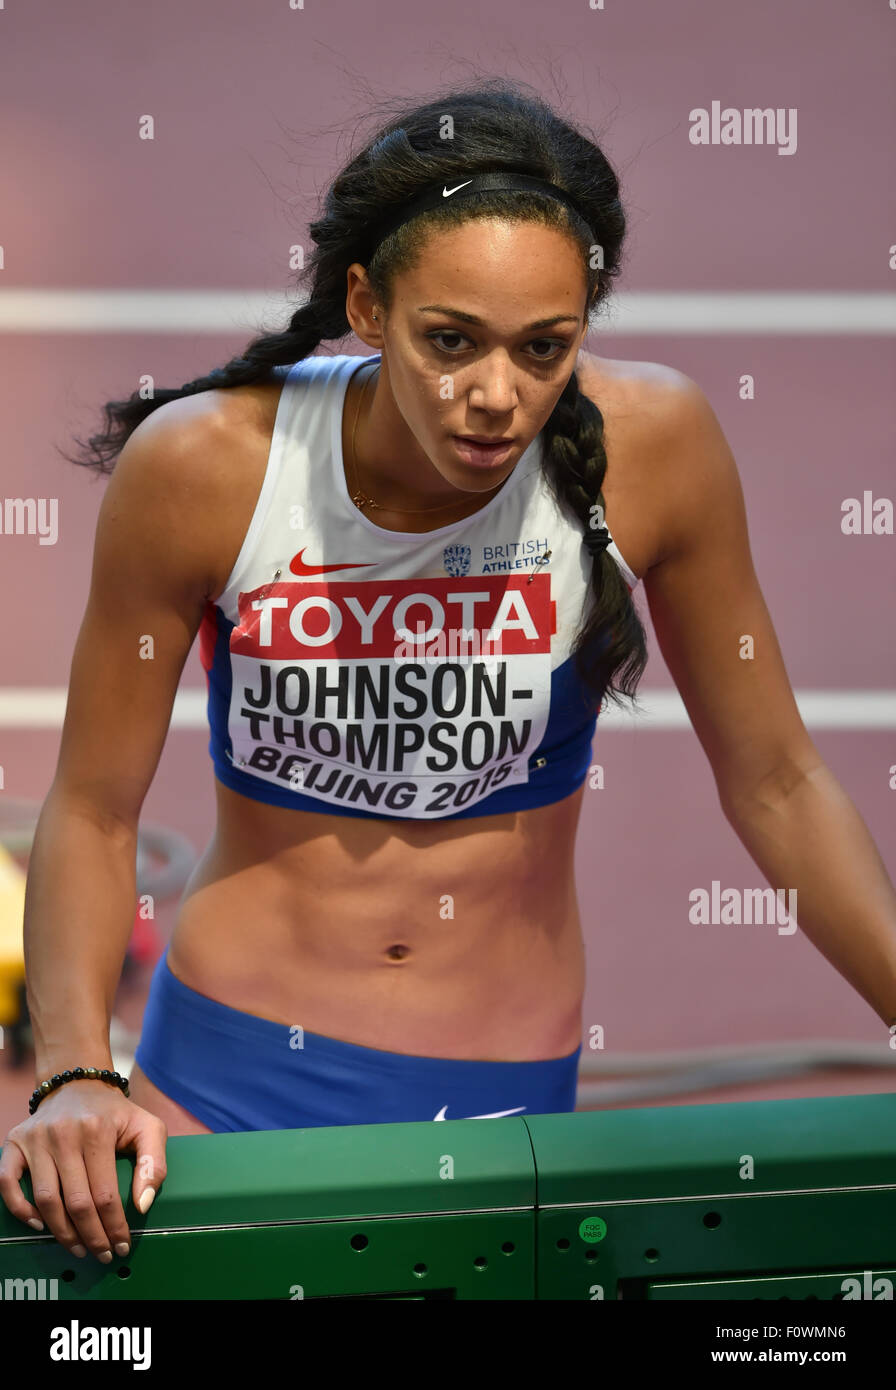 Beijing, China. 22nd August, 2015. Katarina Johnson-Thompson of Great Britain has a word with her coach during the high jump competition of the women heptathlon during day 1 of the 2015 IAAF World Championships at National Stadium on August 22, 2015 in Beijing, China. (Photo by Roger Sedres/Alamy Live News) Stock Photo